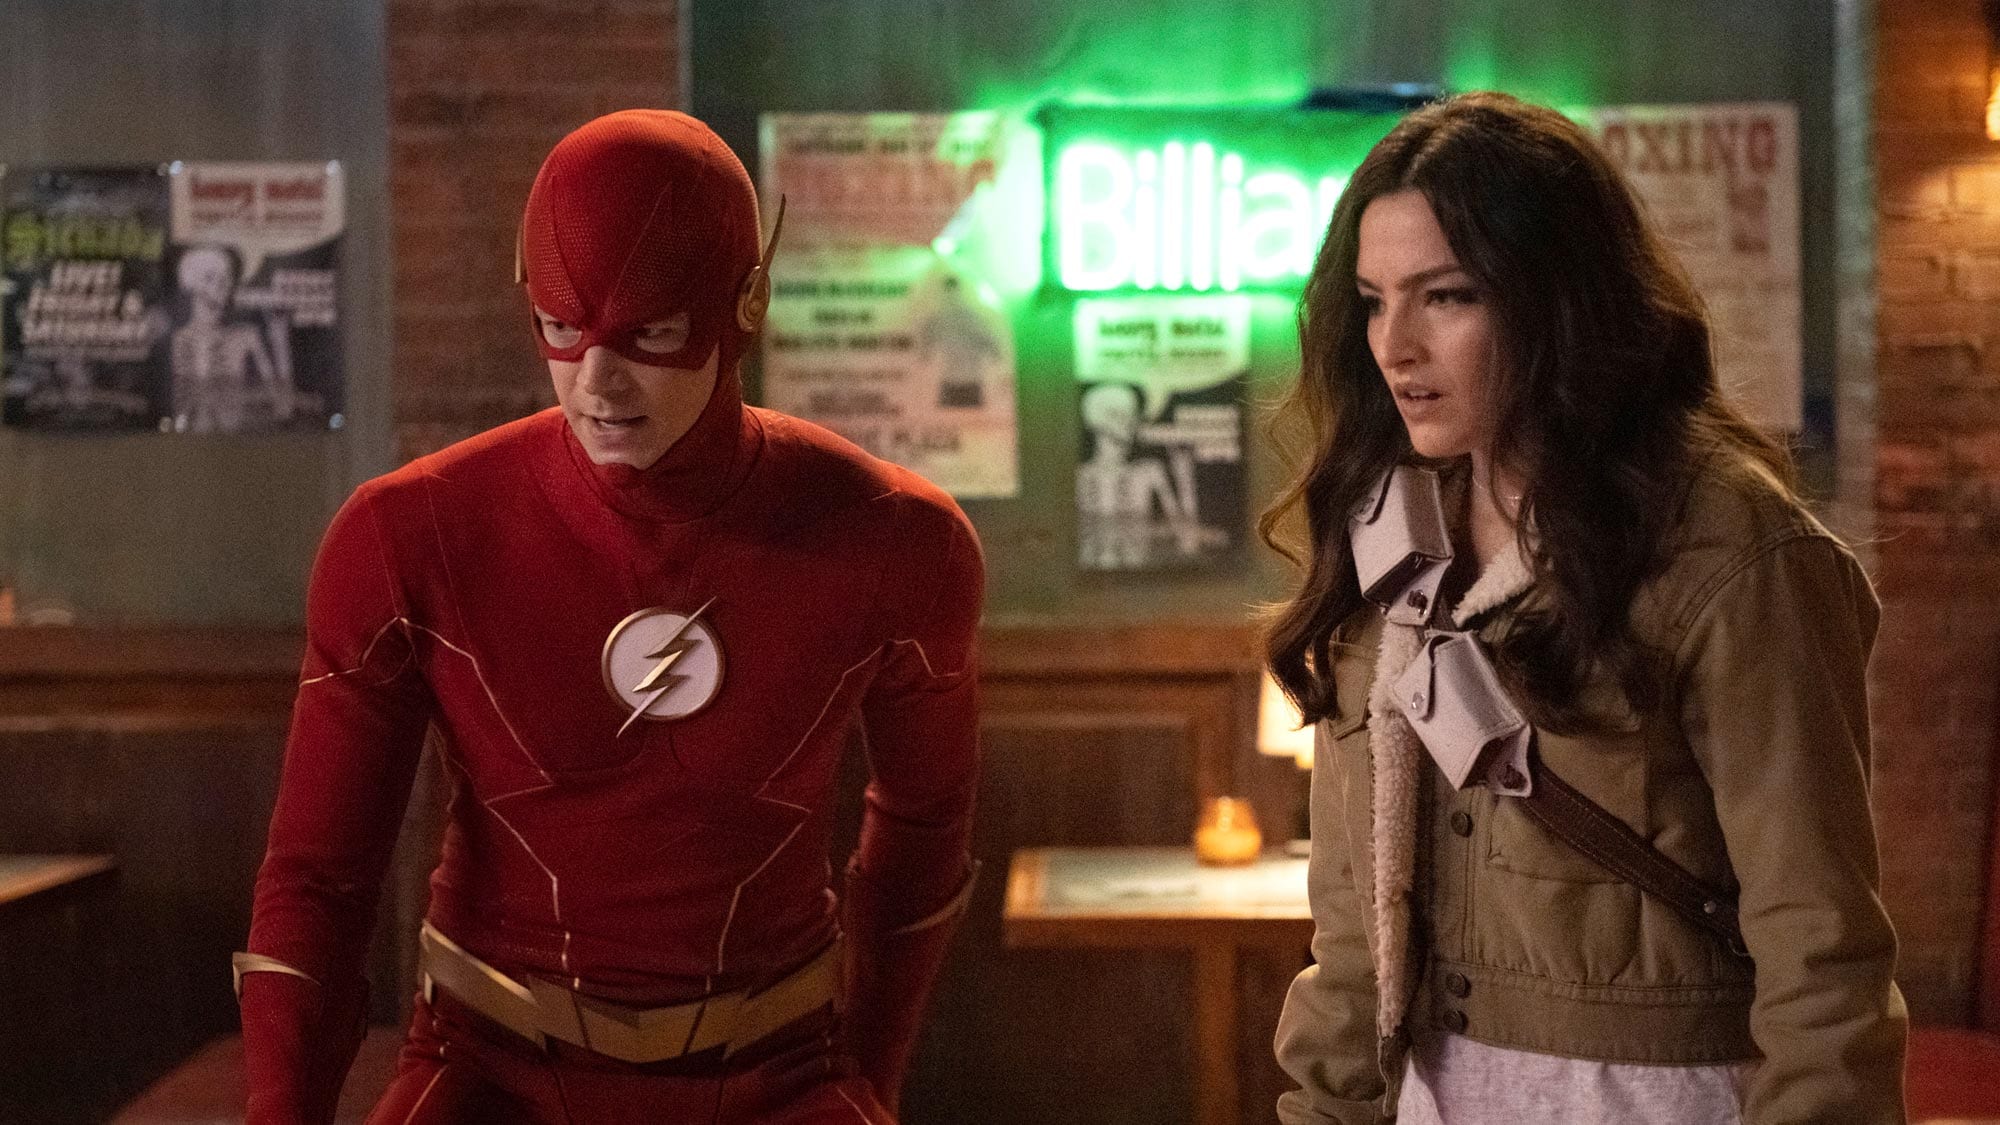 What To Expect From The Flash Season 7 Episode 12?